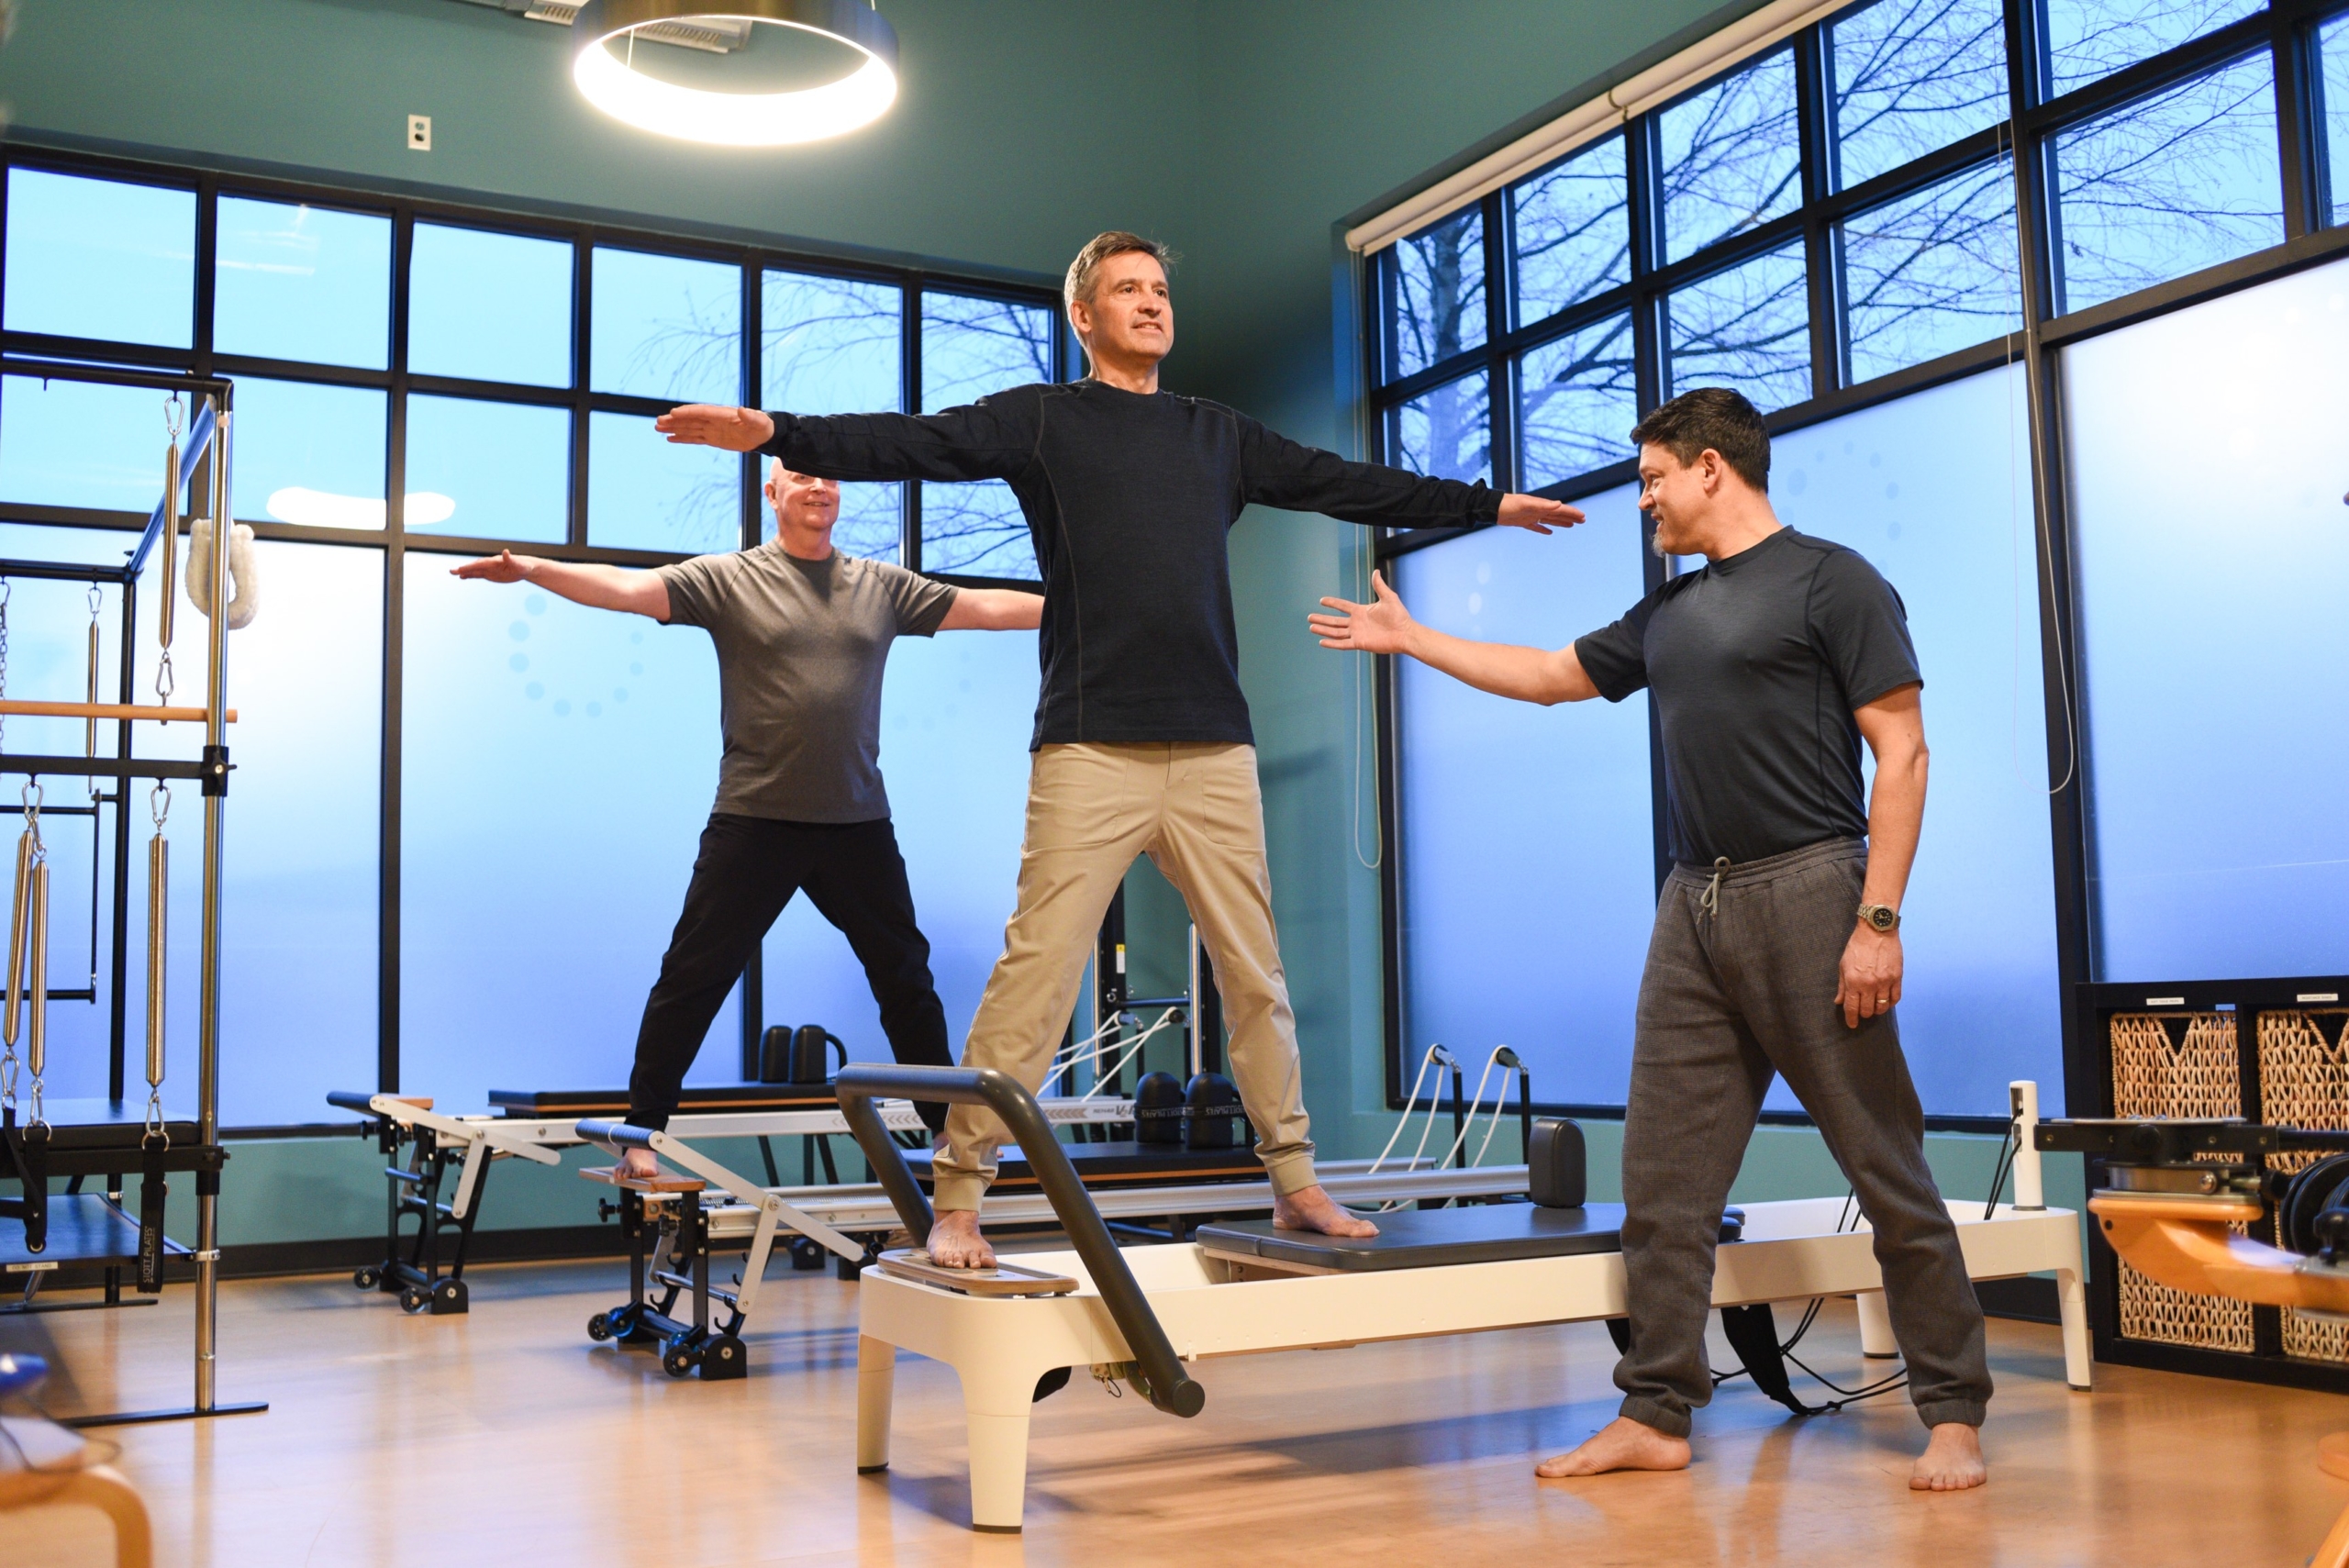 A male Pilates trainer teaching two other men